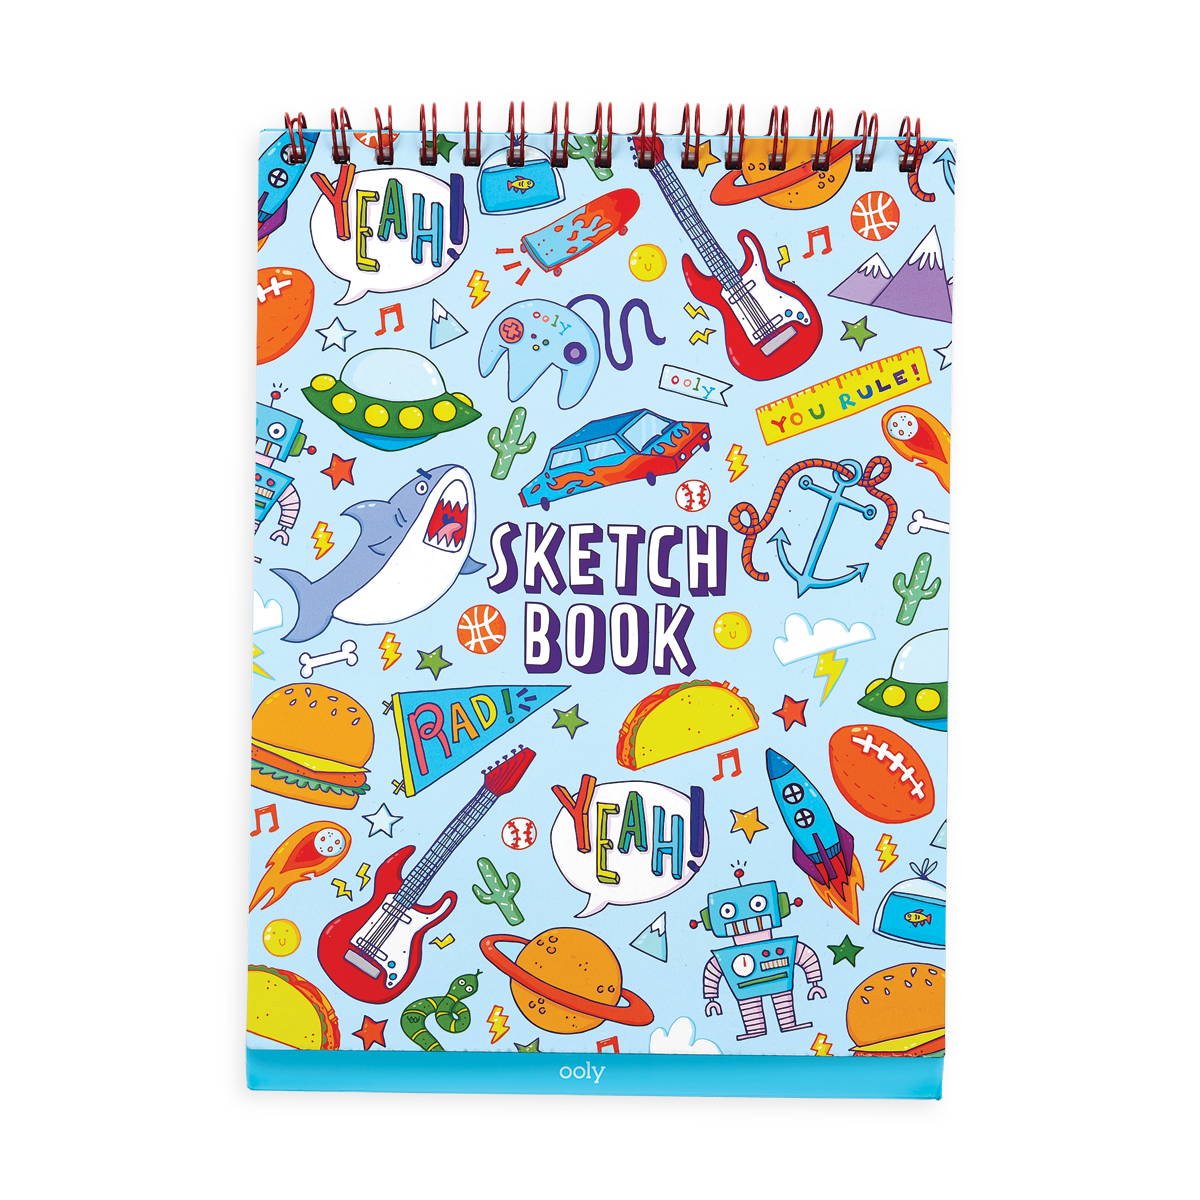 Studio Oh! Anchor Gray Riley Sketchbook One-Size